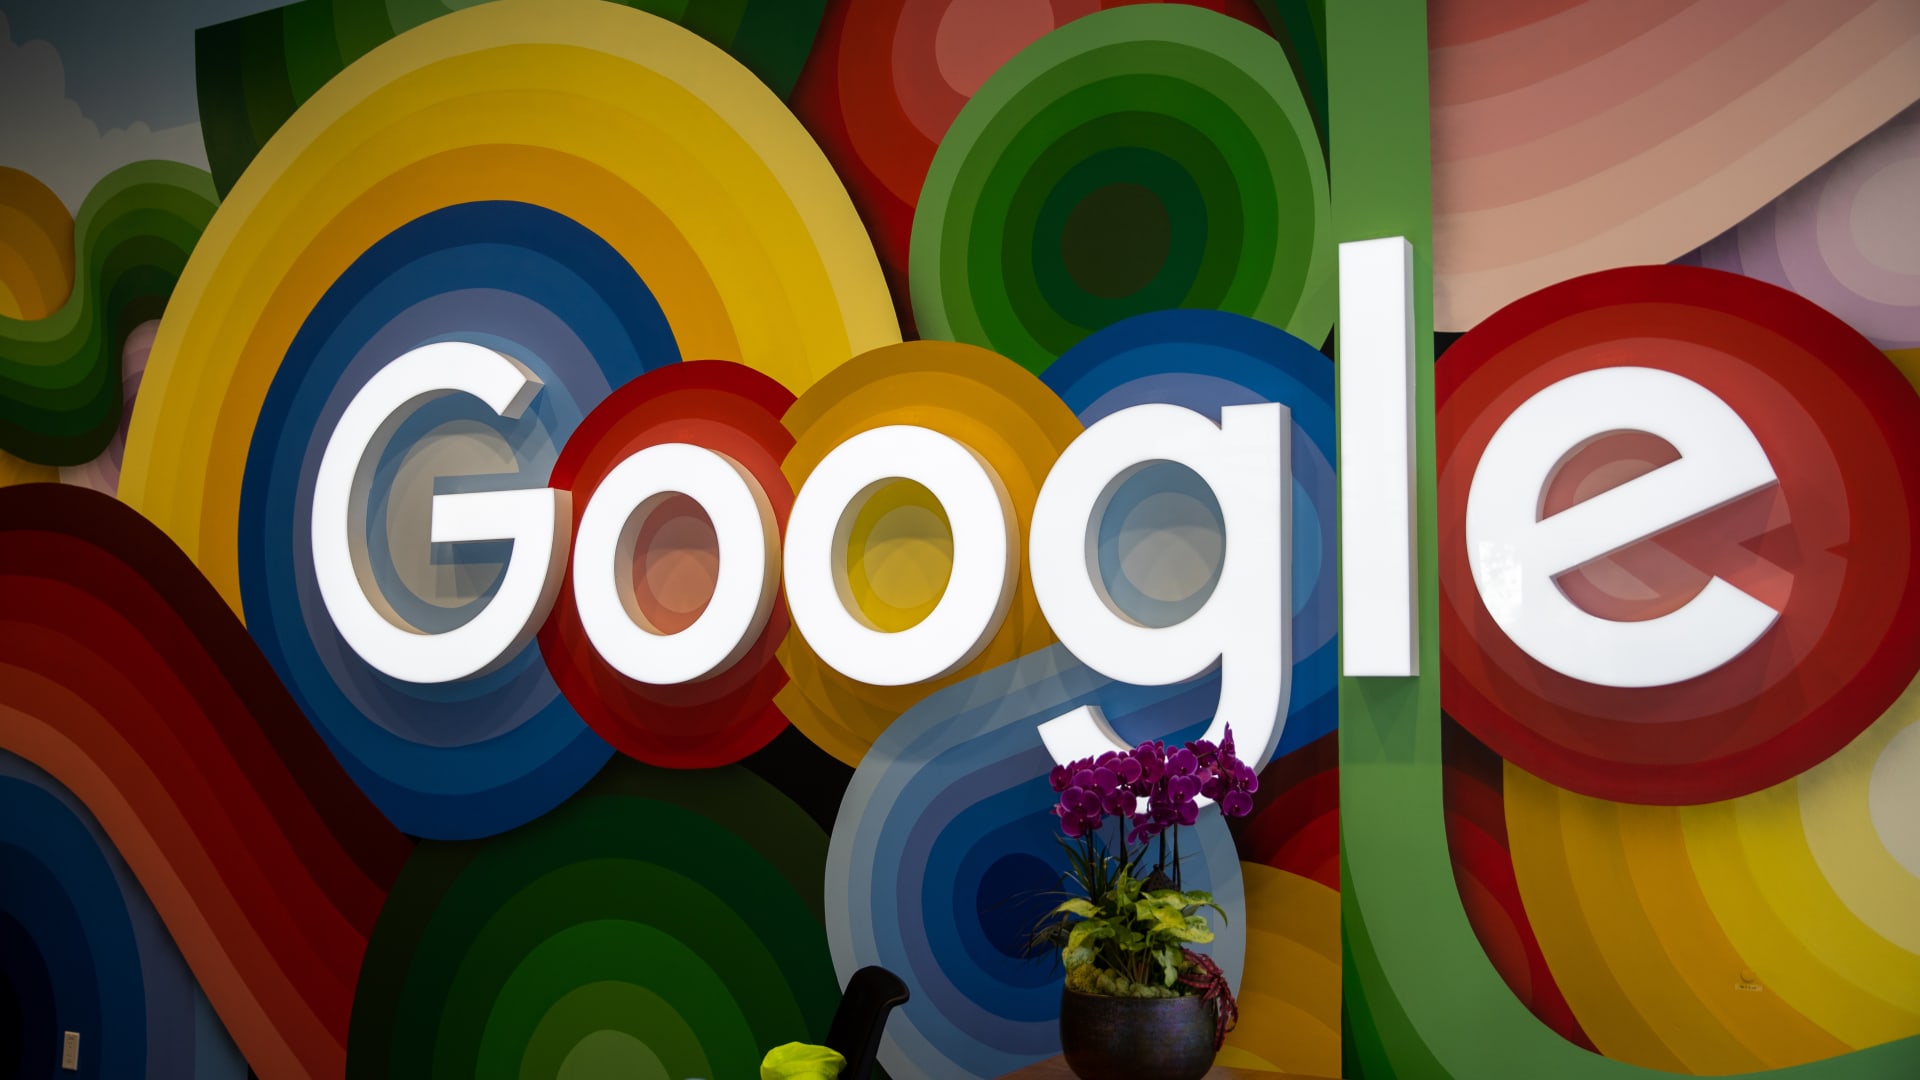 Google, Bain & Company make Glassdoor Best Places to Work since 2009